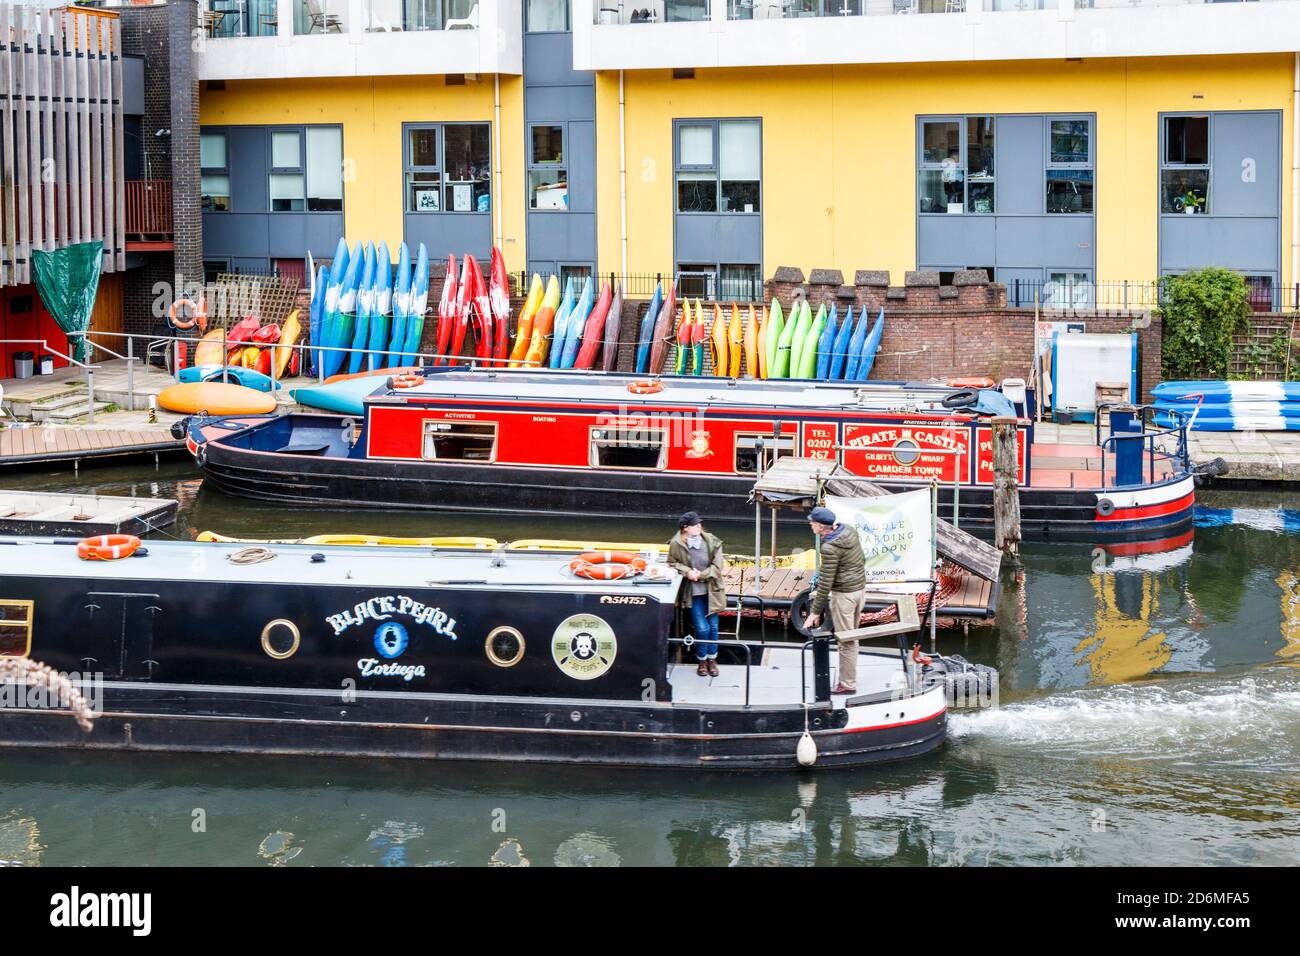 The Pirate Castle, a boating and outdoor activities charity in a fully-accessible community centre on Regent's Canal in Camden Town, London, UK Stock Photo